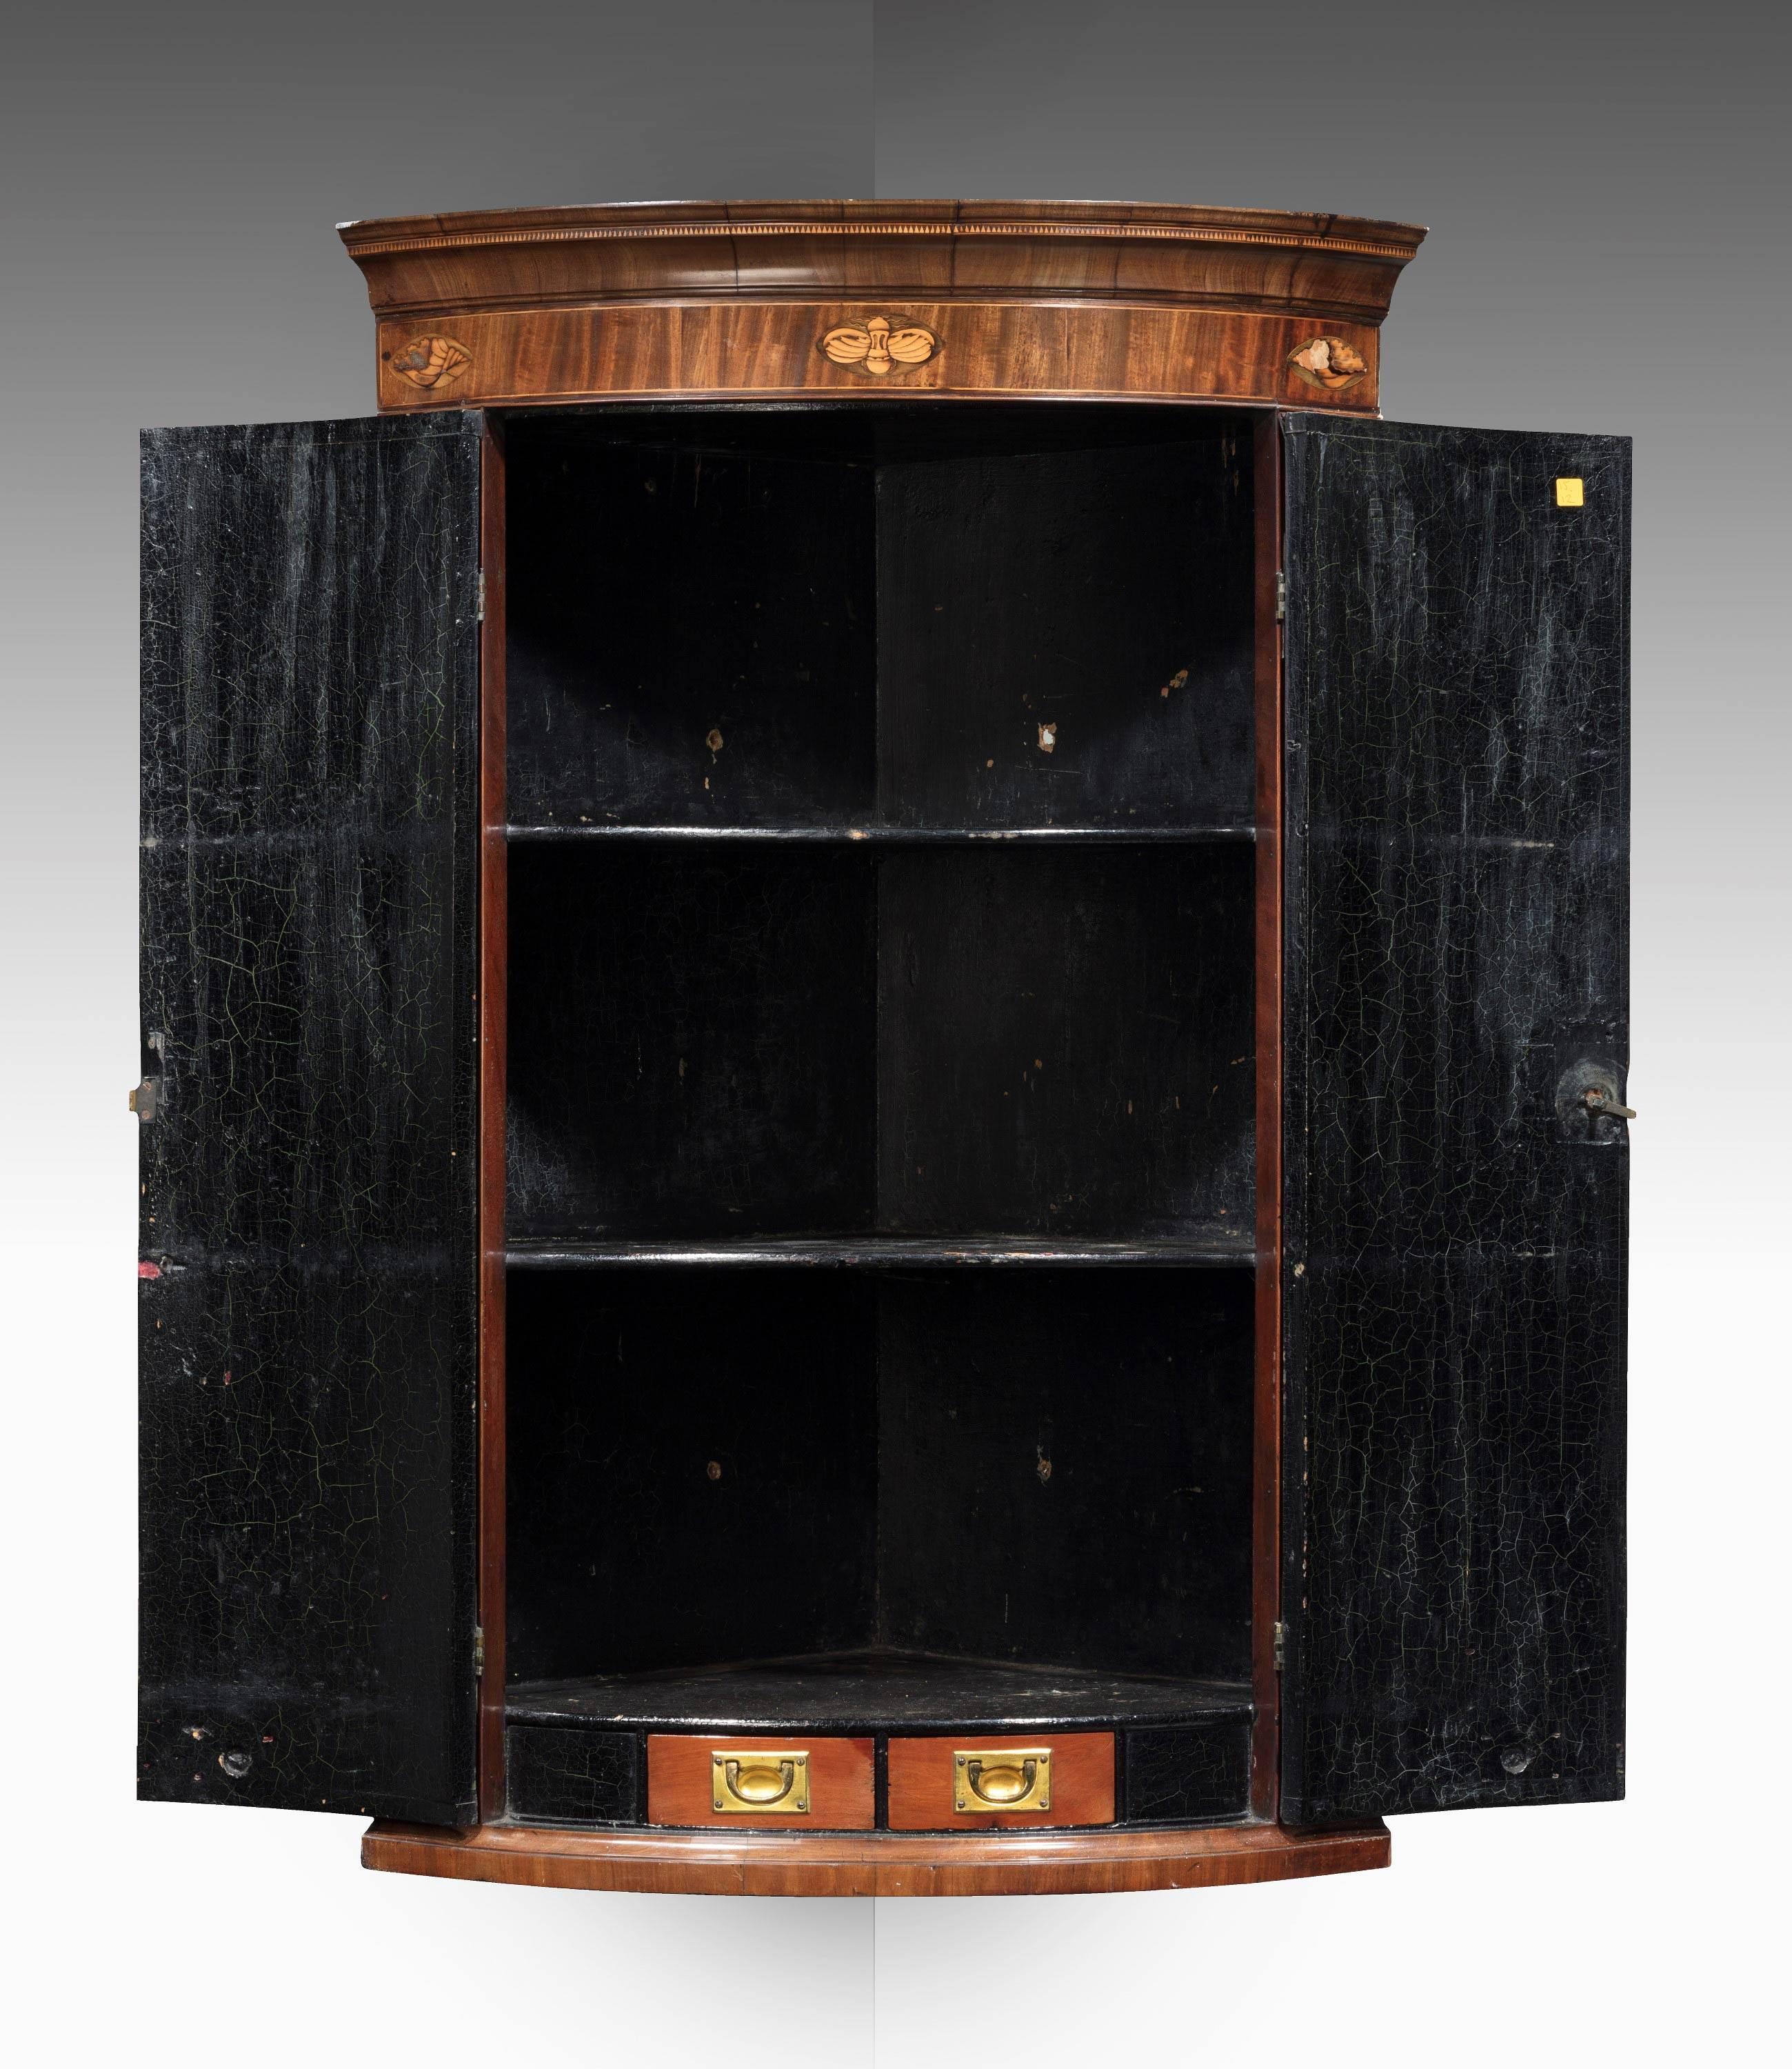 A very good quality mahogany George III period bowfront corner cupboard. Boxwood and satinwood marquetry inlays. The interior incorporating two military type drawers as well as two shelves. Excellent overall condition.